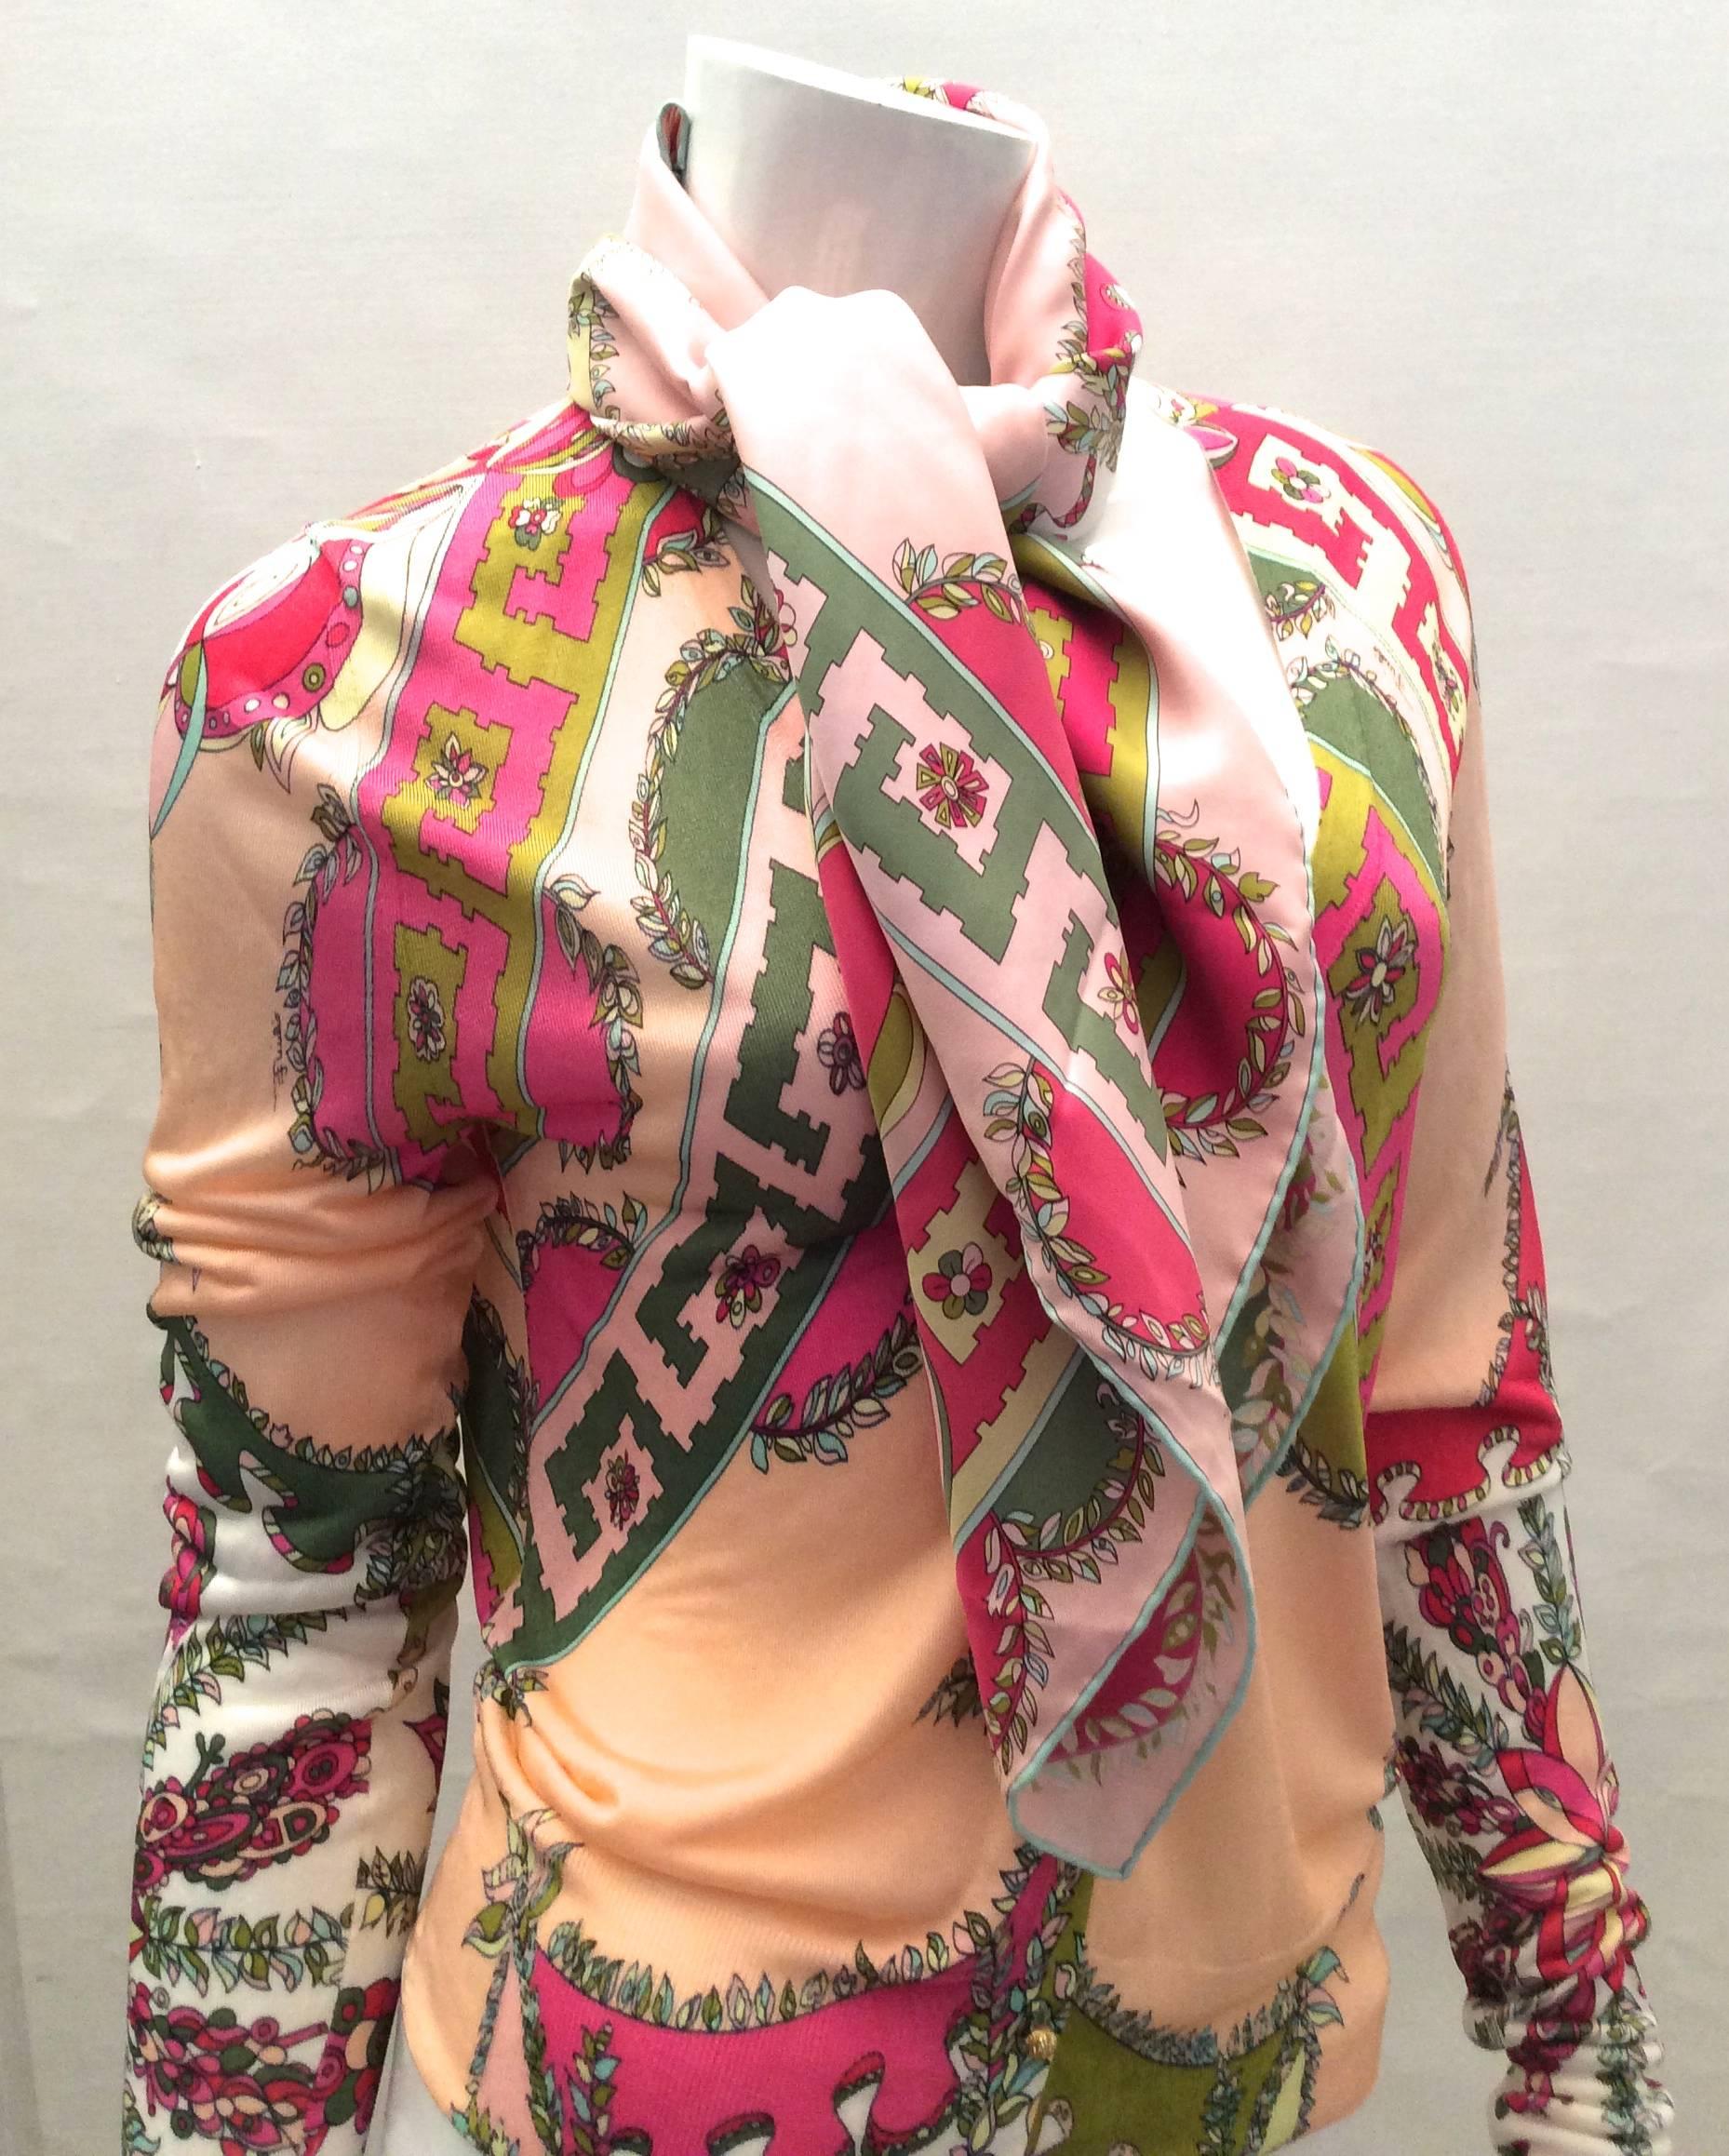 New Emilio Pucci Cardigan with Matching Silk Scarf In Excellent Condition For Sale In Boca Raton, FL